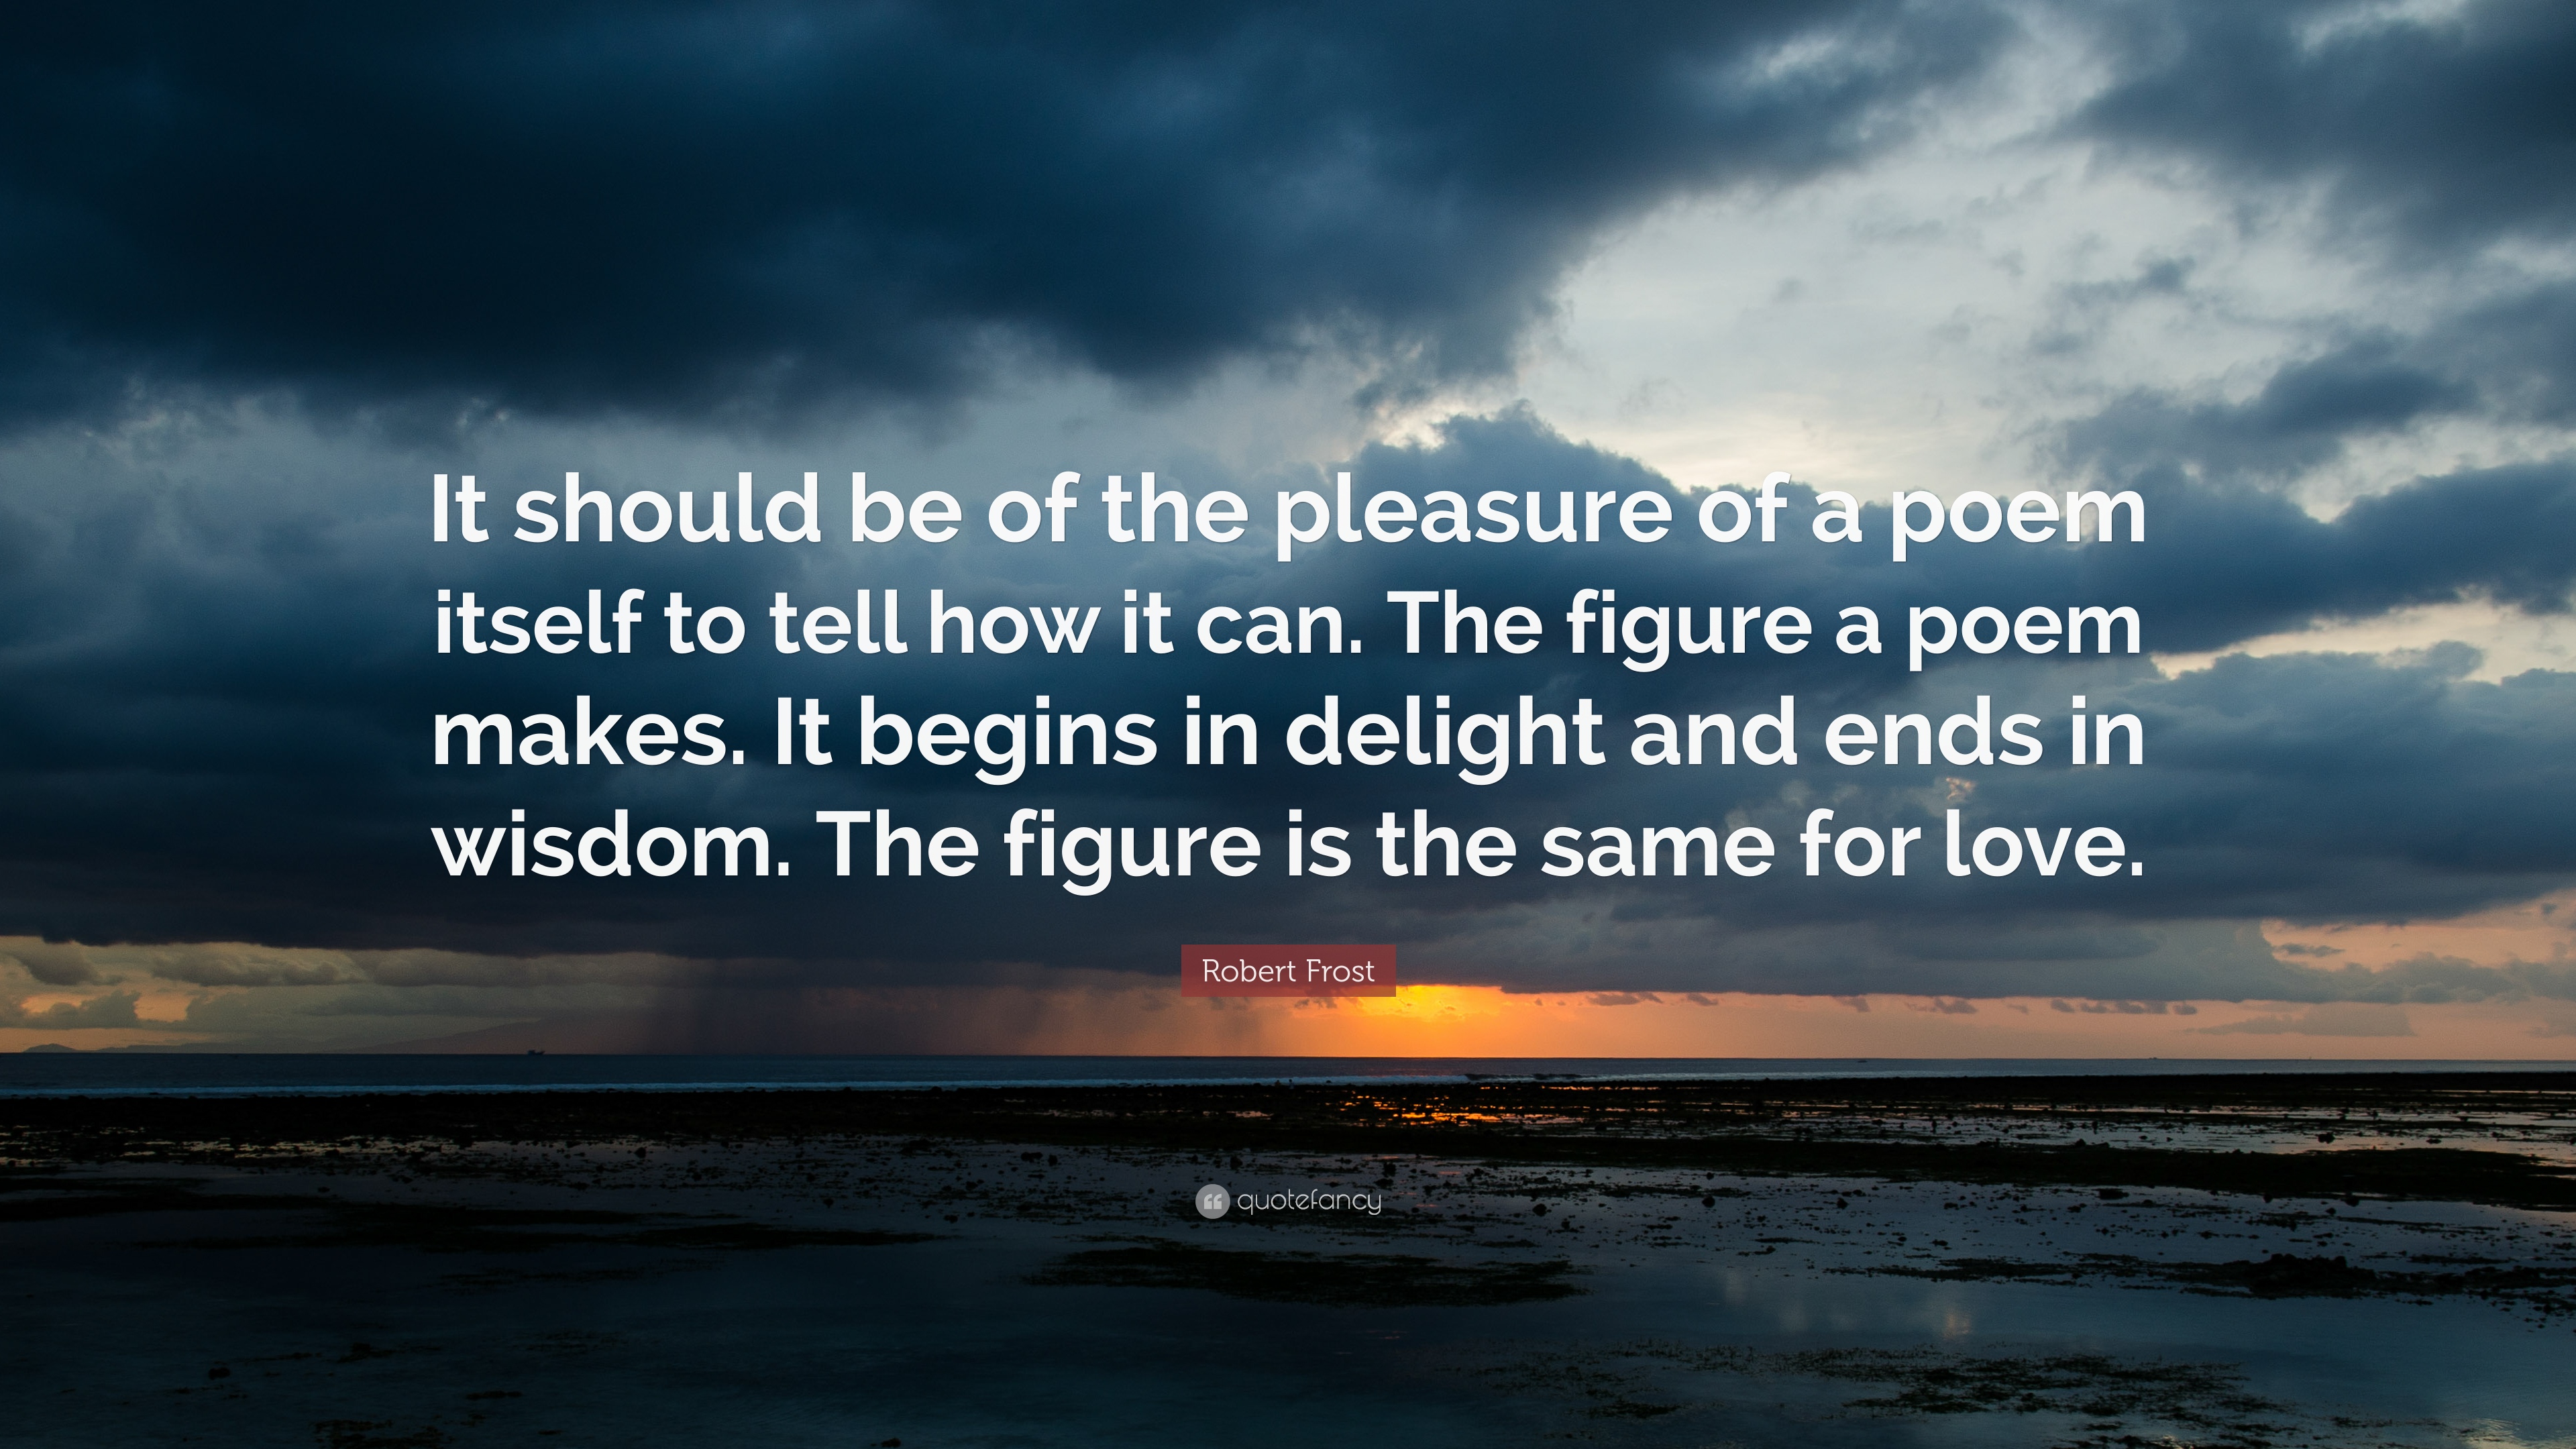 Robert Frost Quote: “It should be of the pleasure of a poem itself